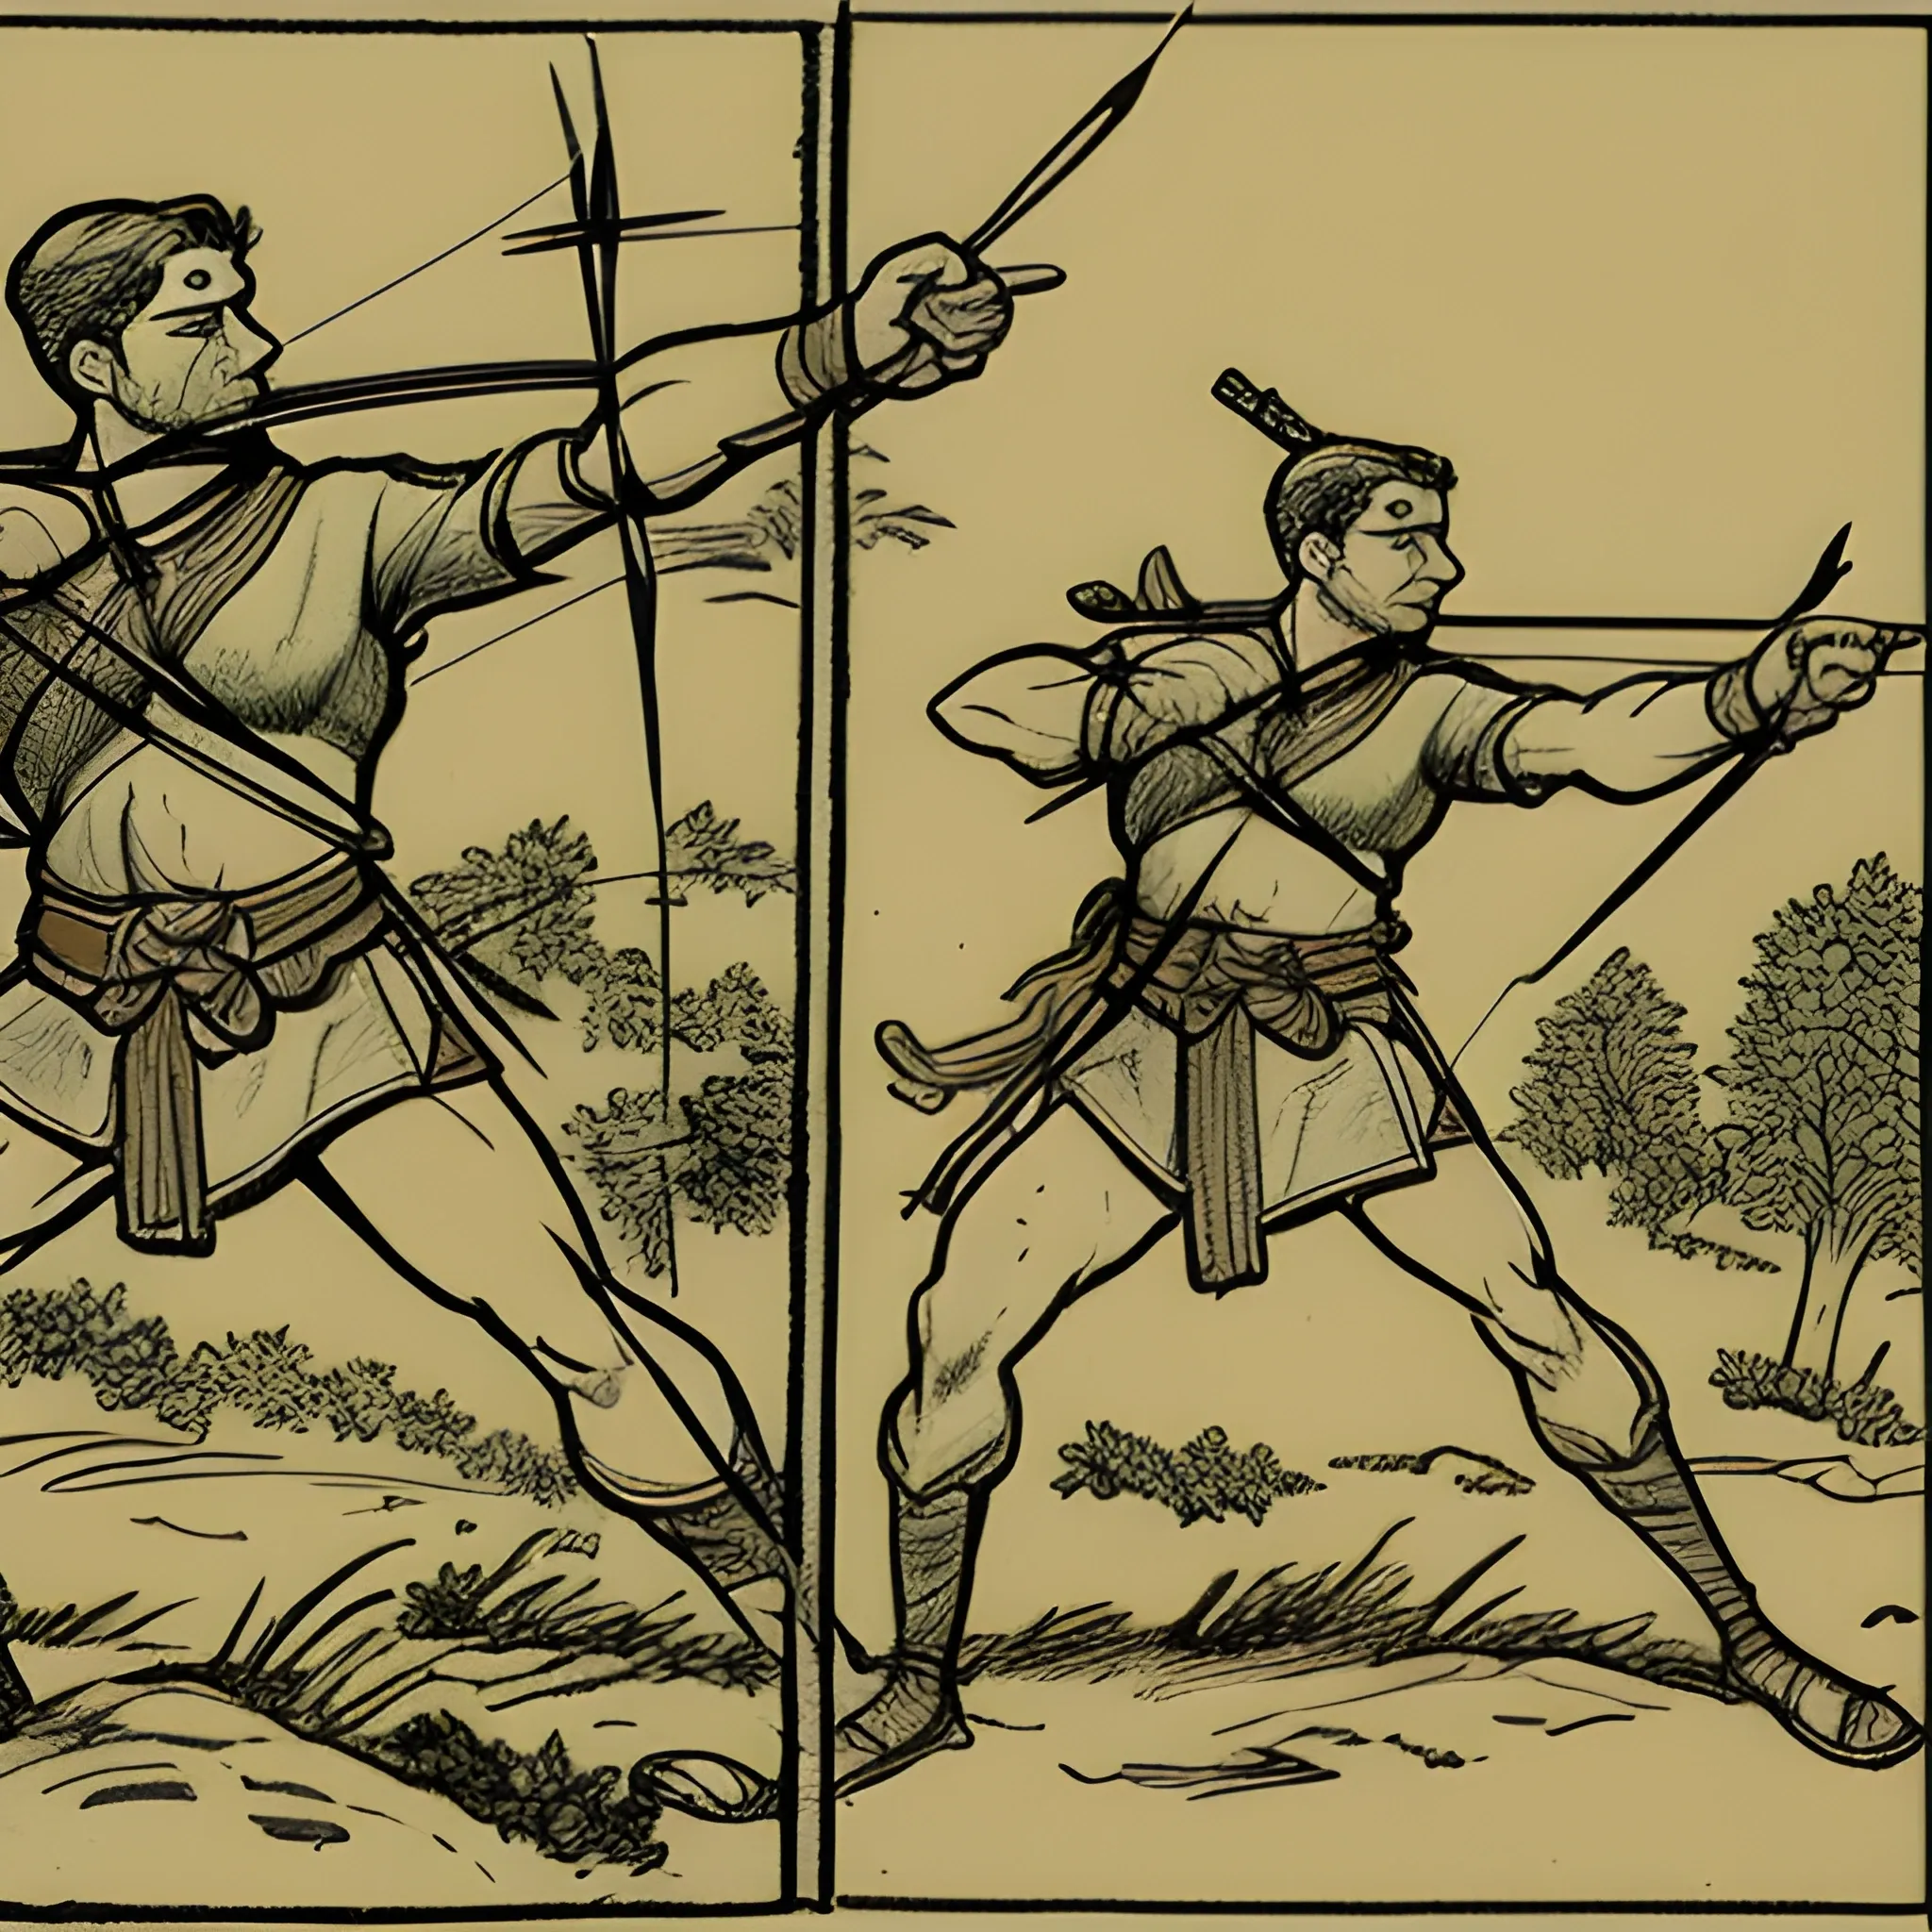 An archer in the foreground drawing a bow and aiming an arrow, with two or three warriors in the mid-frame raising their weapons ready to attack, all set against a dimly lit forest background, Cartoon